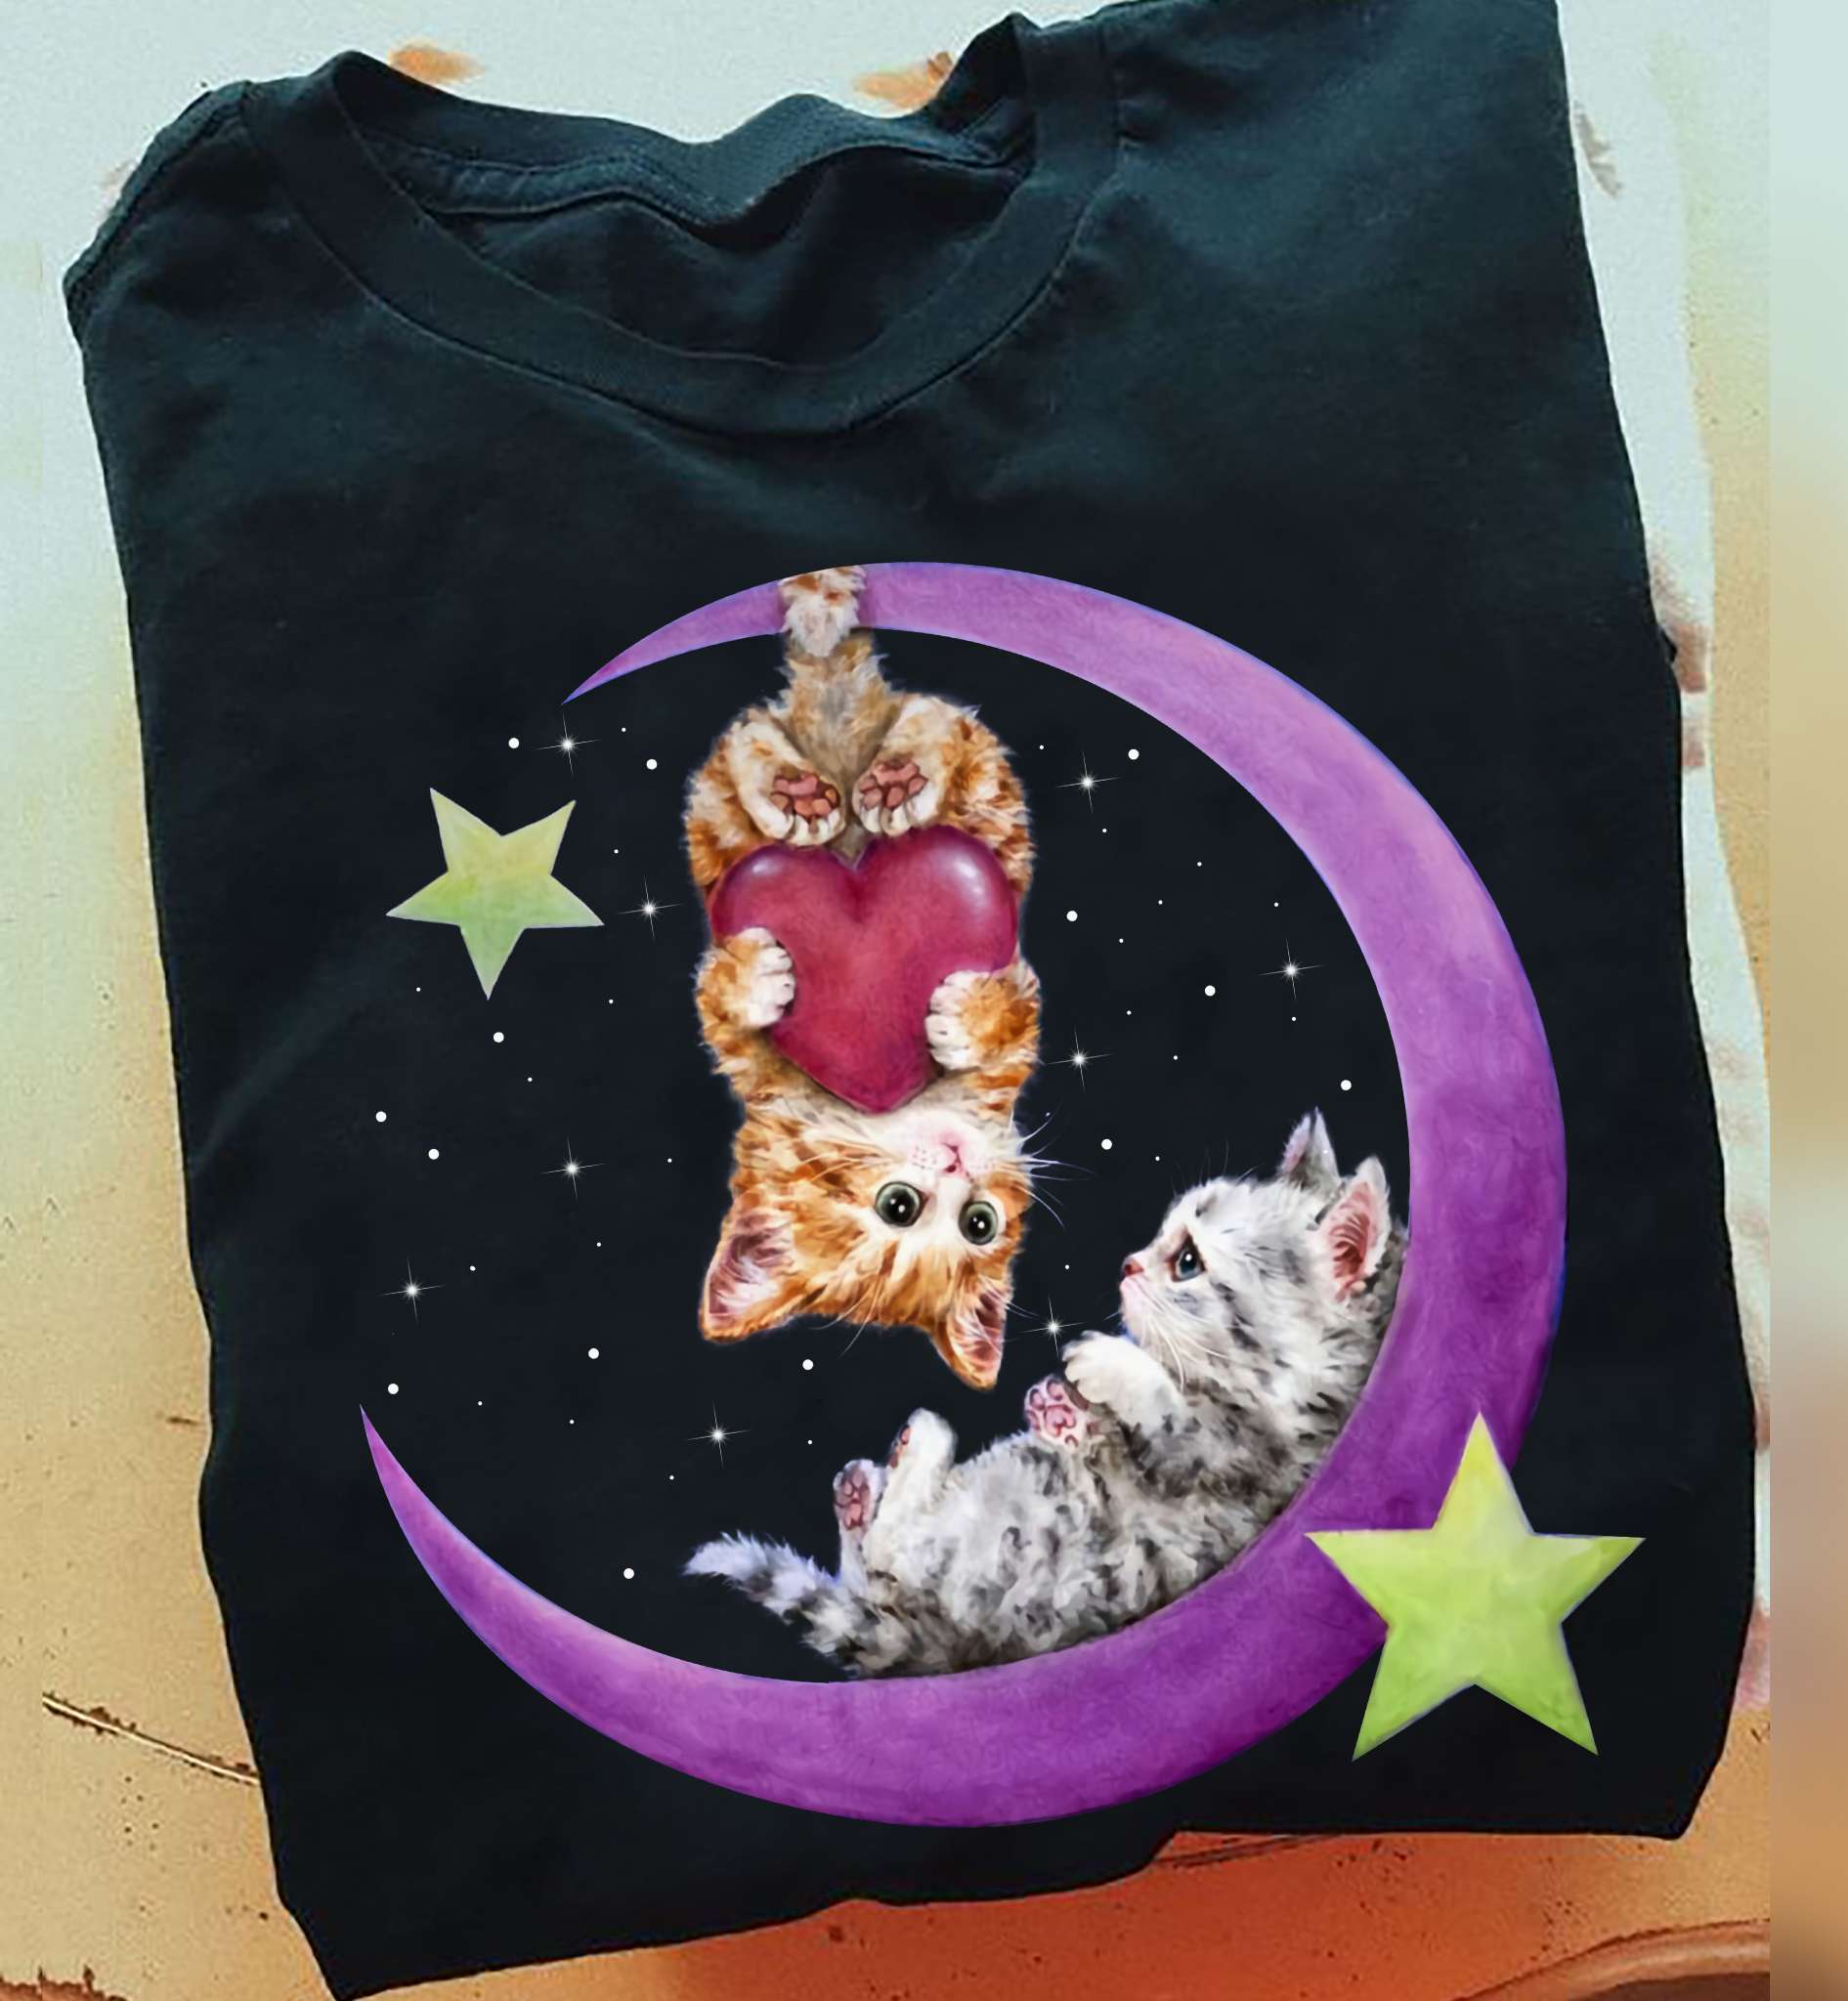 Kitty cat on the Moon - Gorgeous kitty cats, gift for cat lover